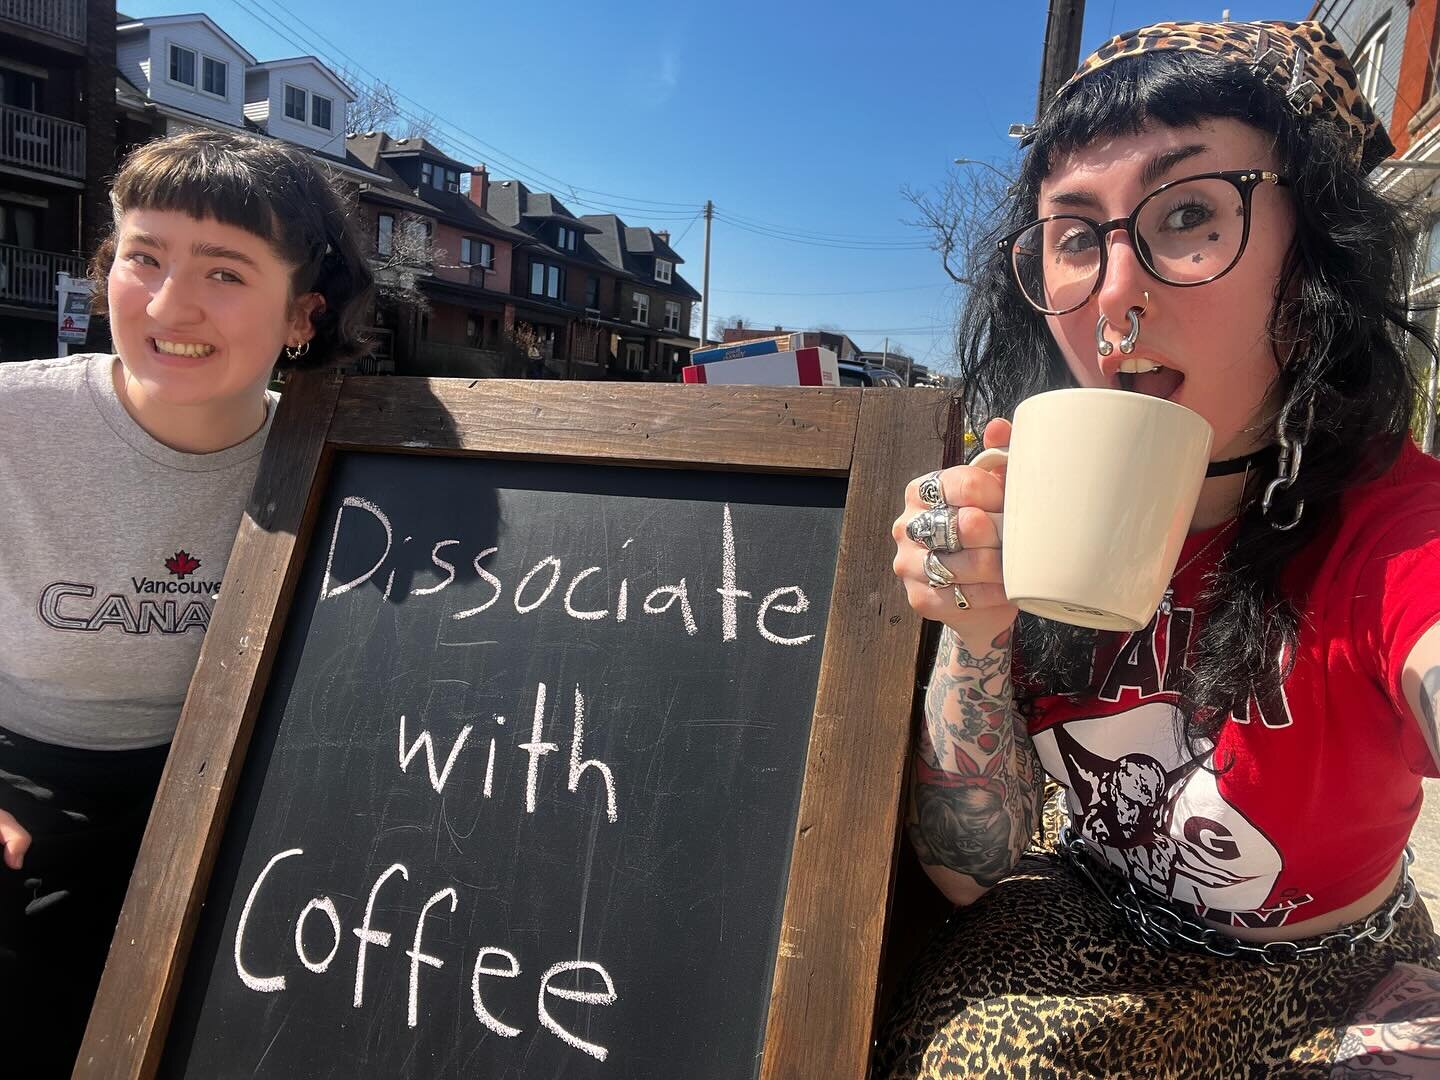 Listen to the sign! You know you want a nice, cold coffee on this beautiful day. 🌞 

#vintagecoffeeroasters #hamont #hamiltoncoffee #local #localcoffee #hamontcoffee #coffeeshop